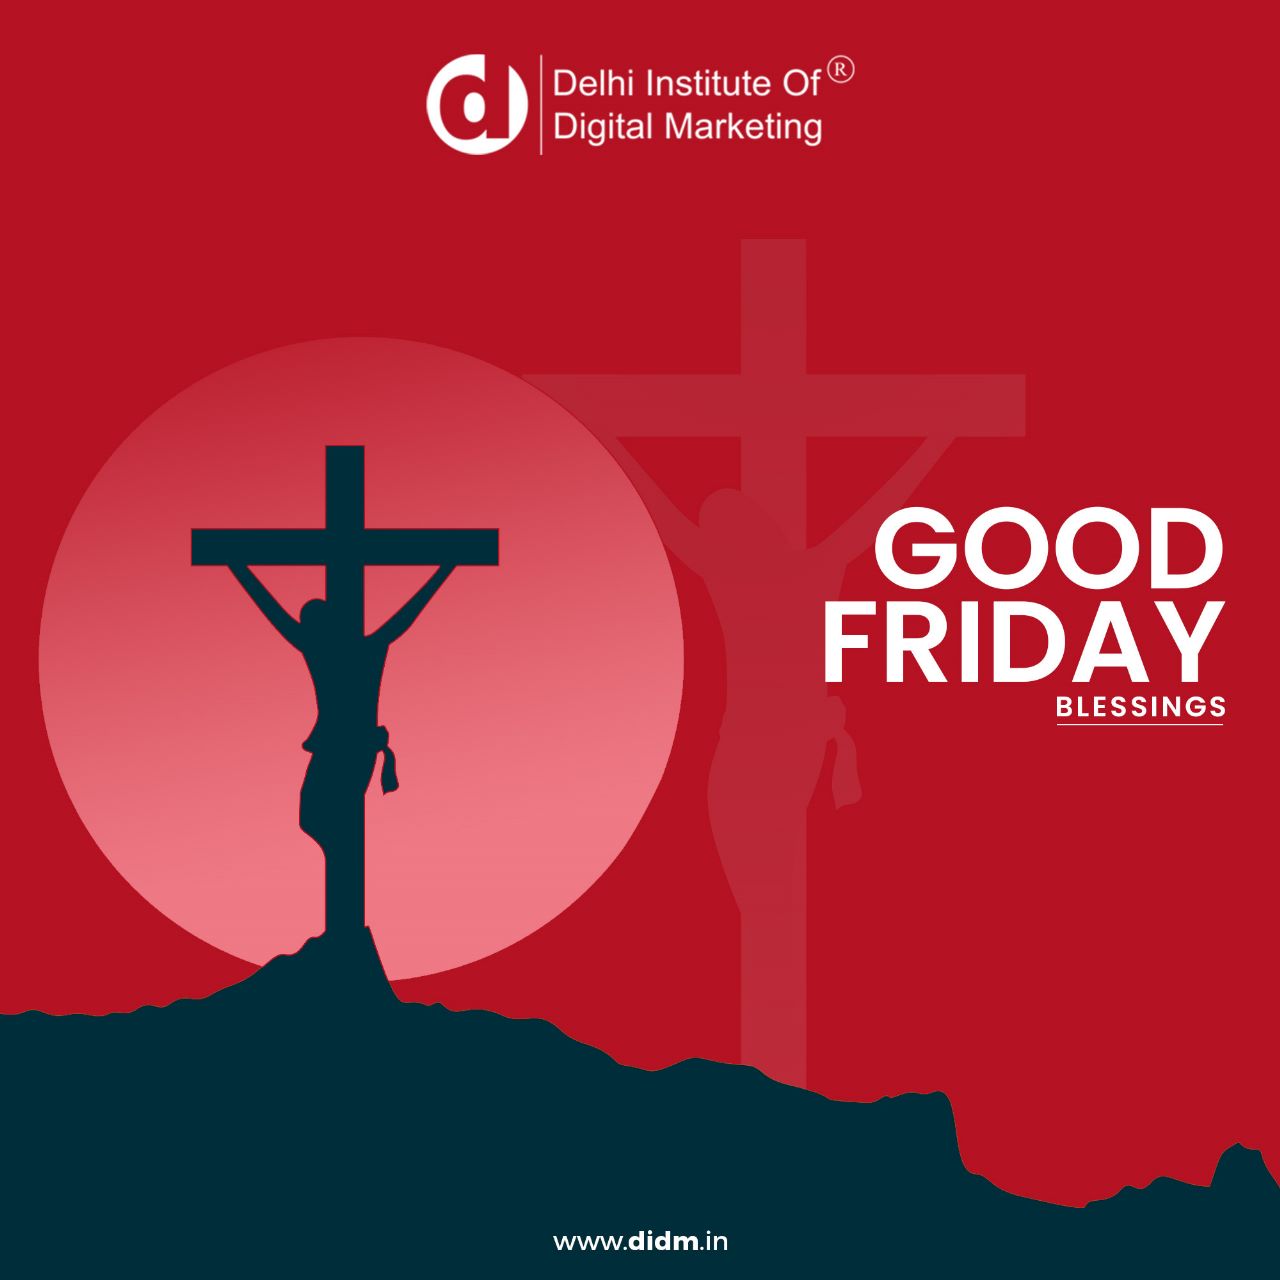 Happy Good Friday To You All!